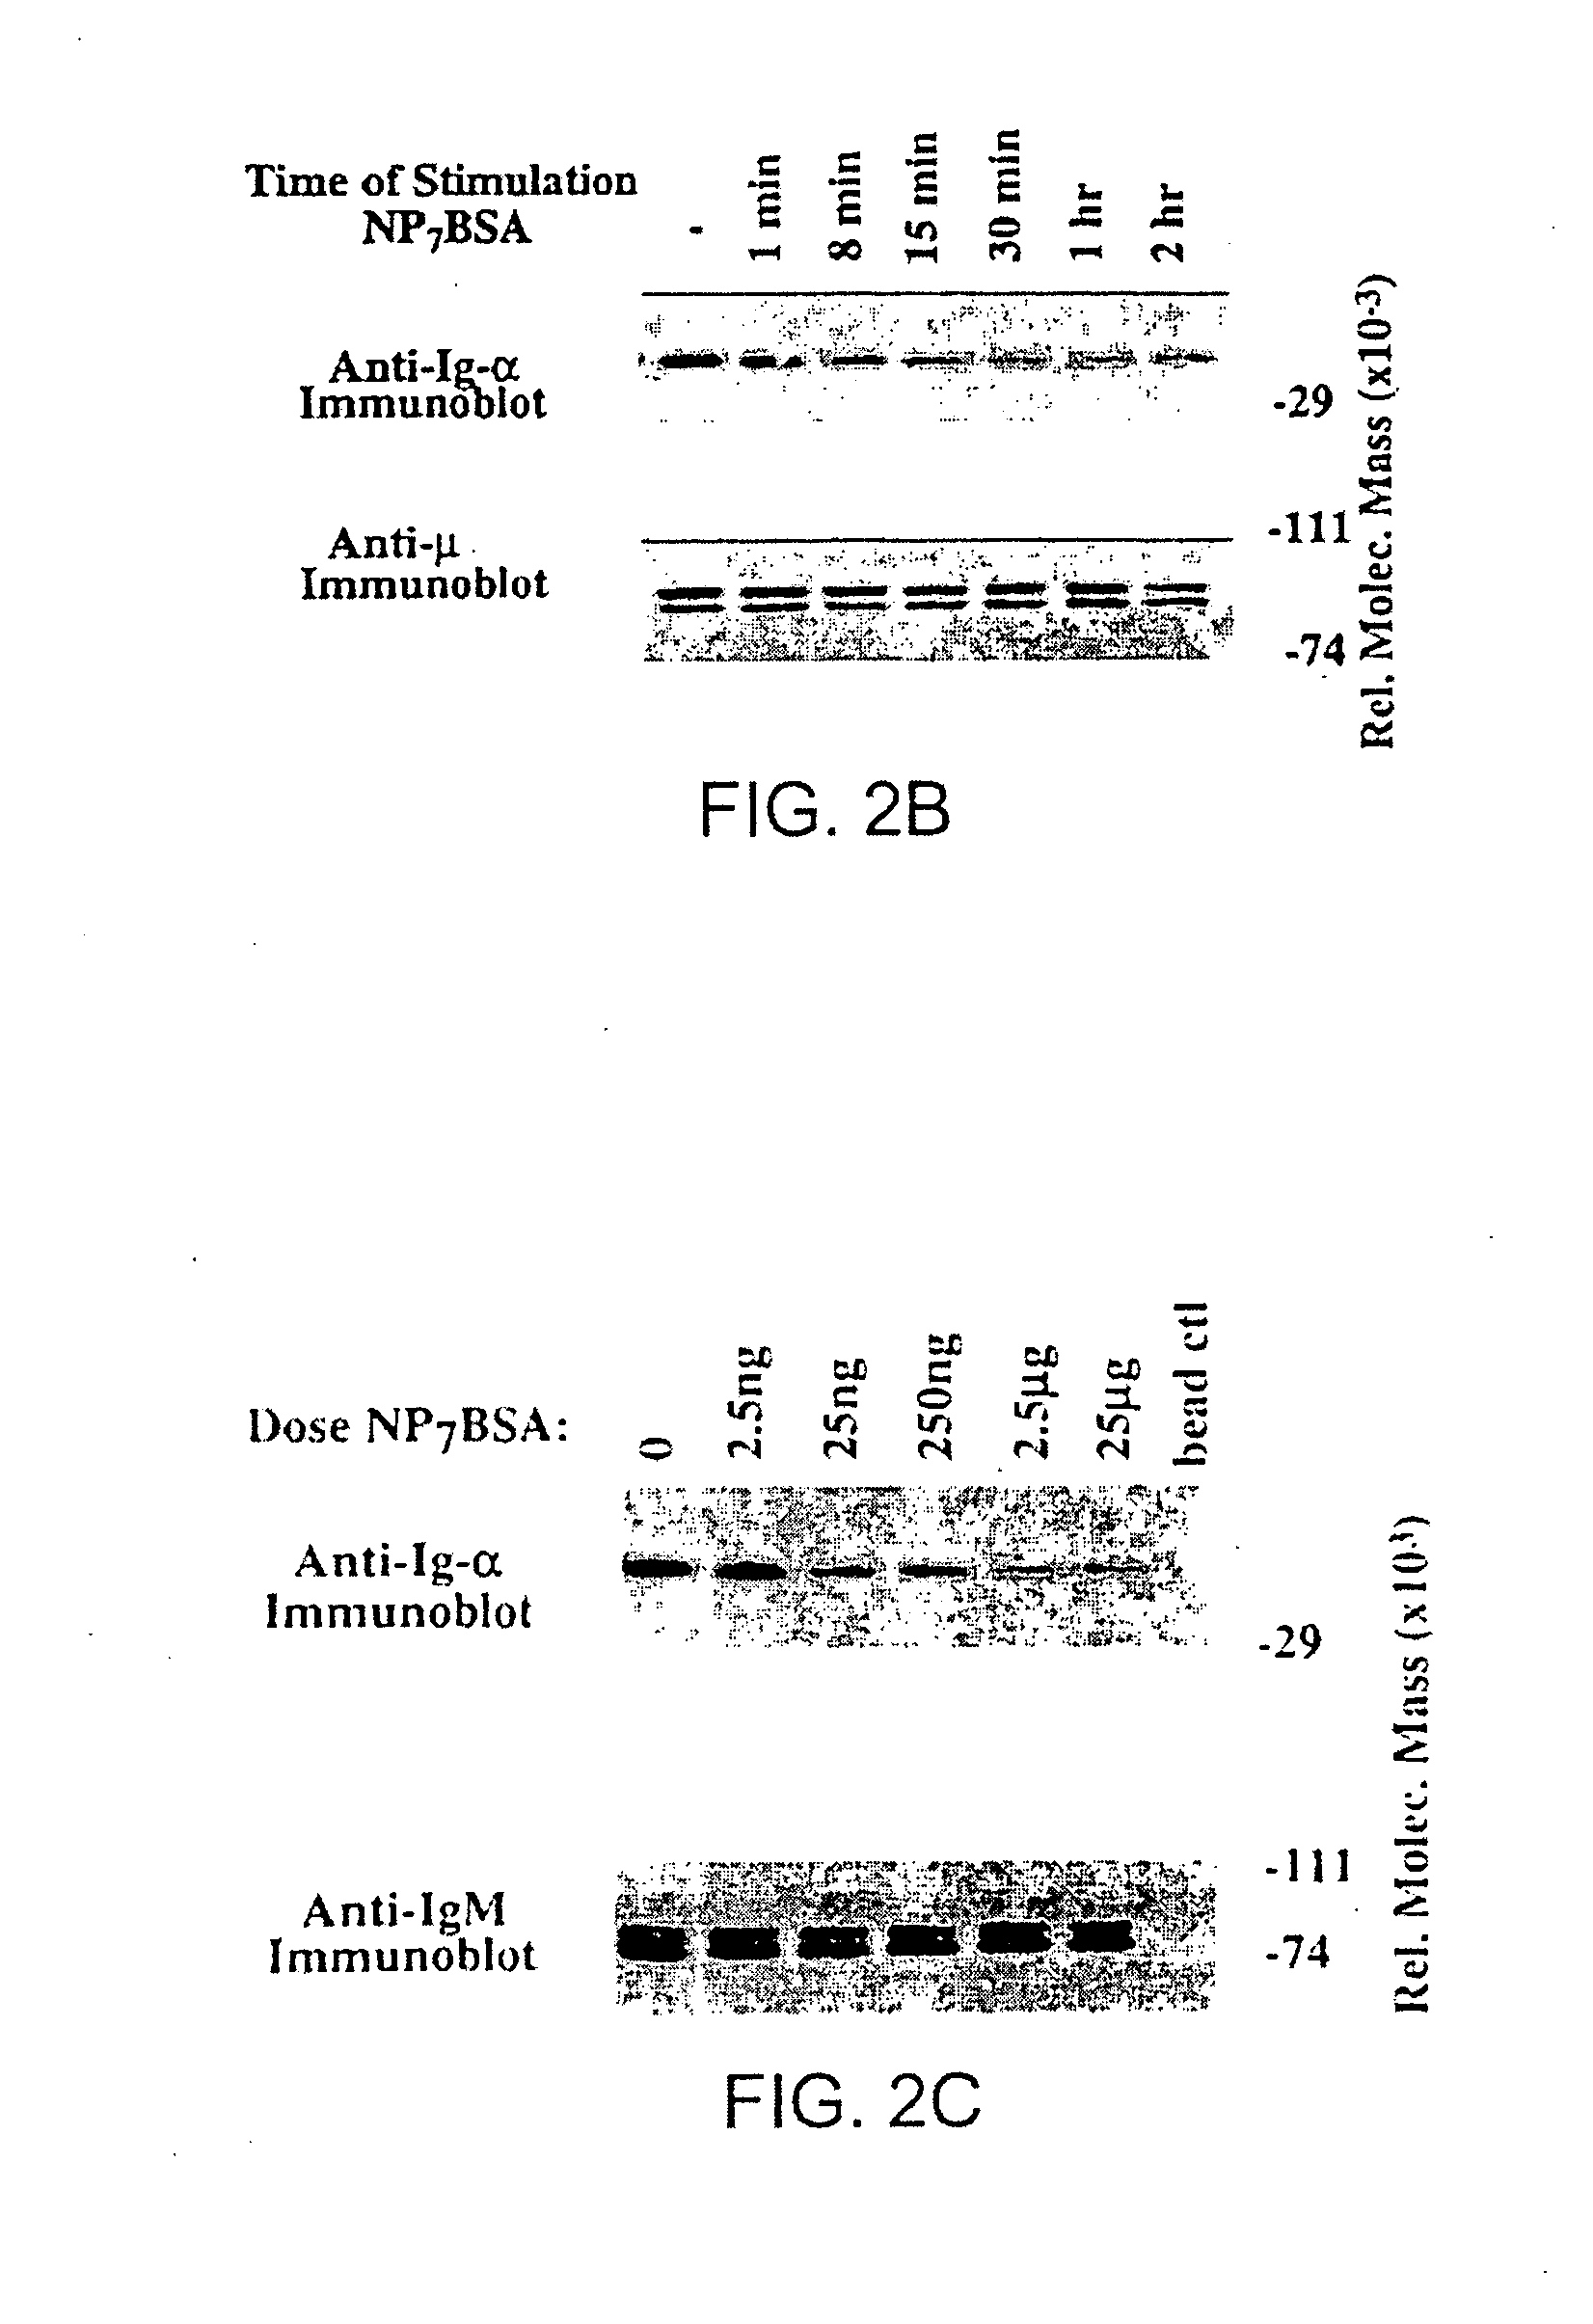 Product and method for treatment of conditions associated with receptor-desensitization